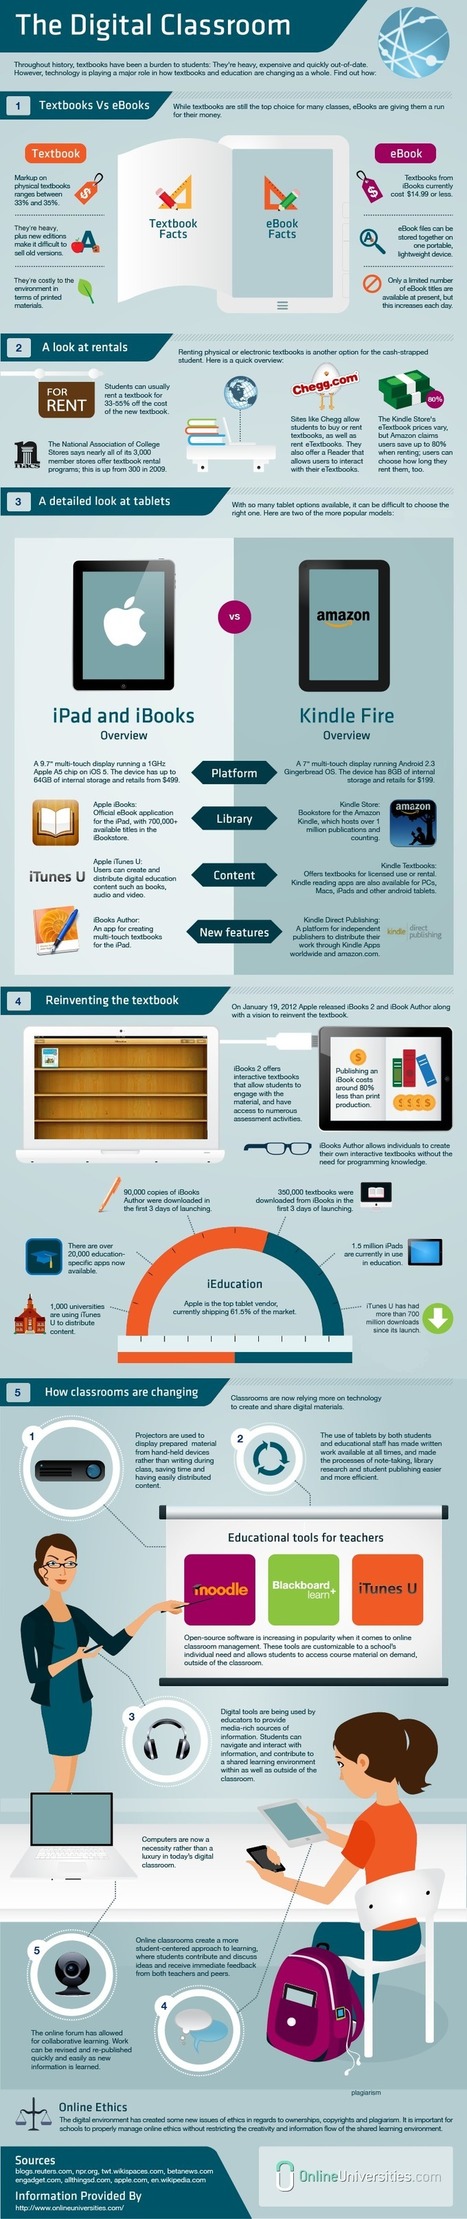 The Elements Of A Digital Classroom [Infographic] | gpmt | Scoop.it